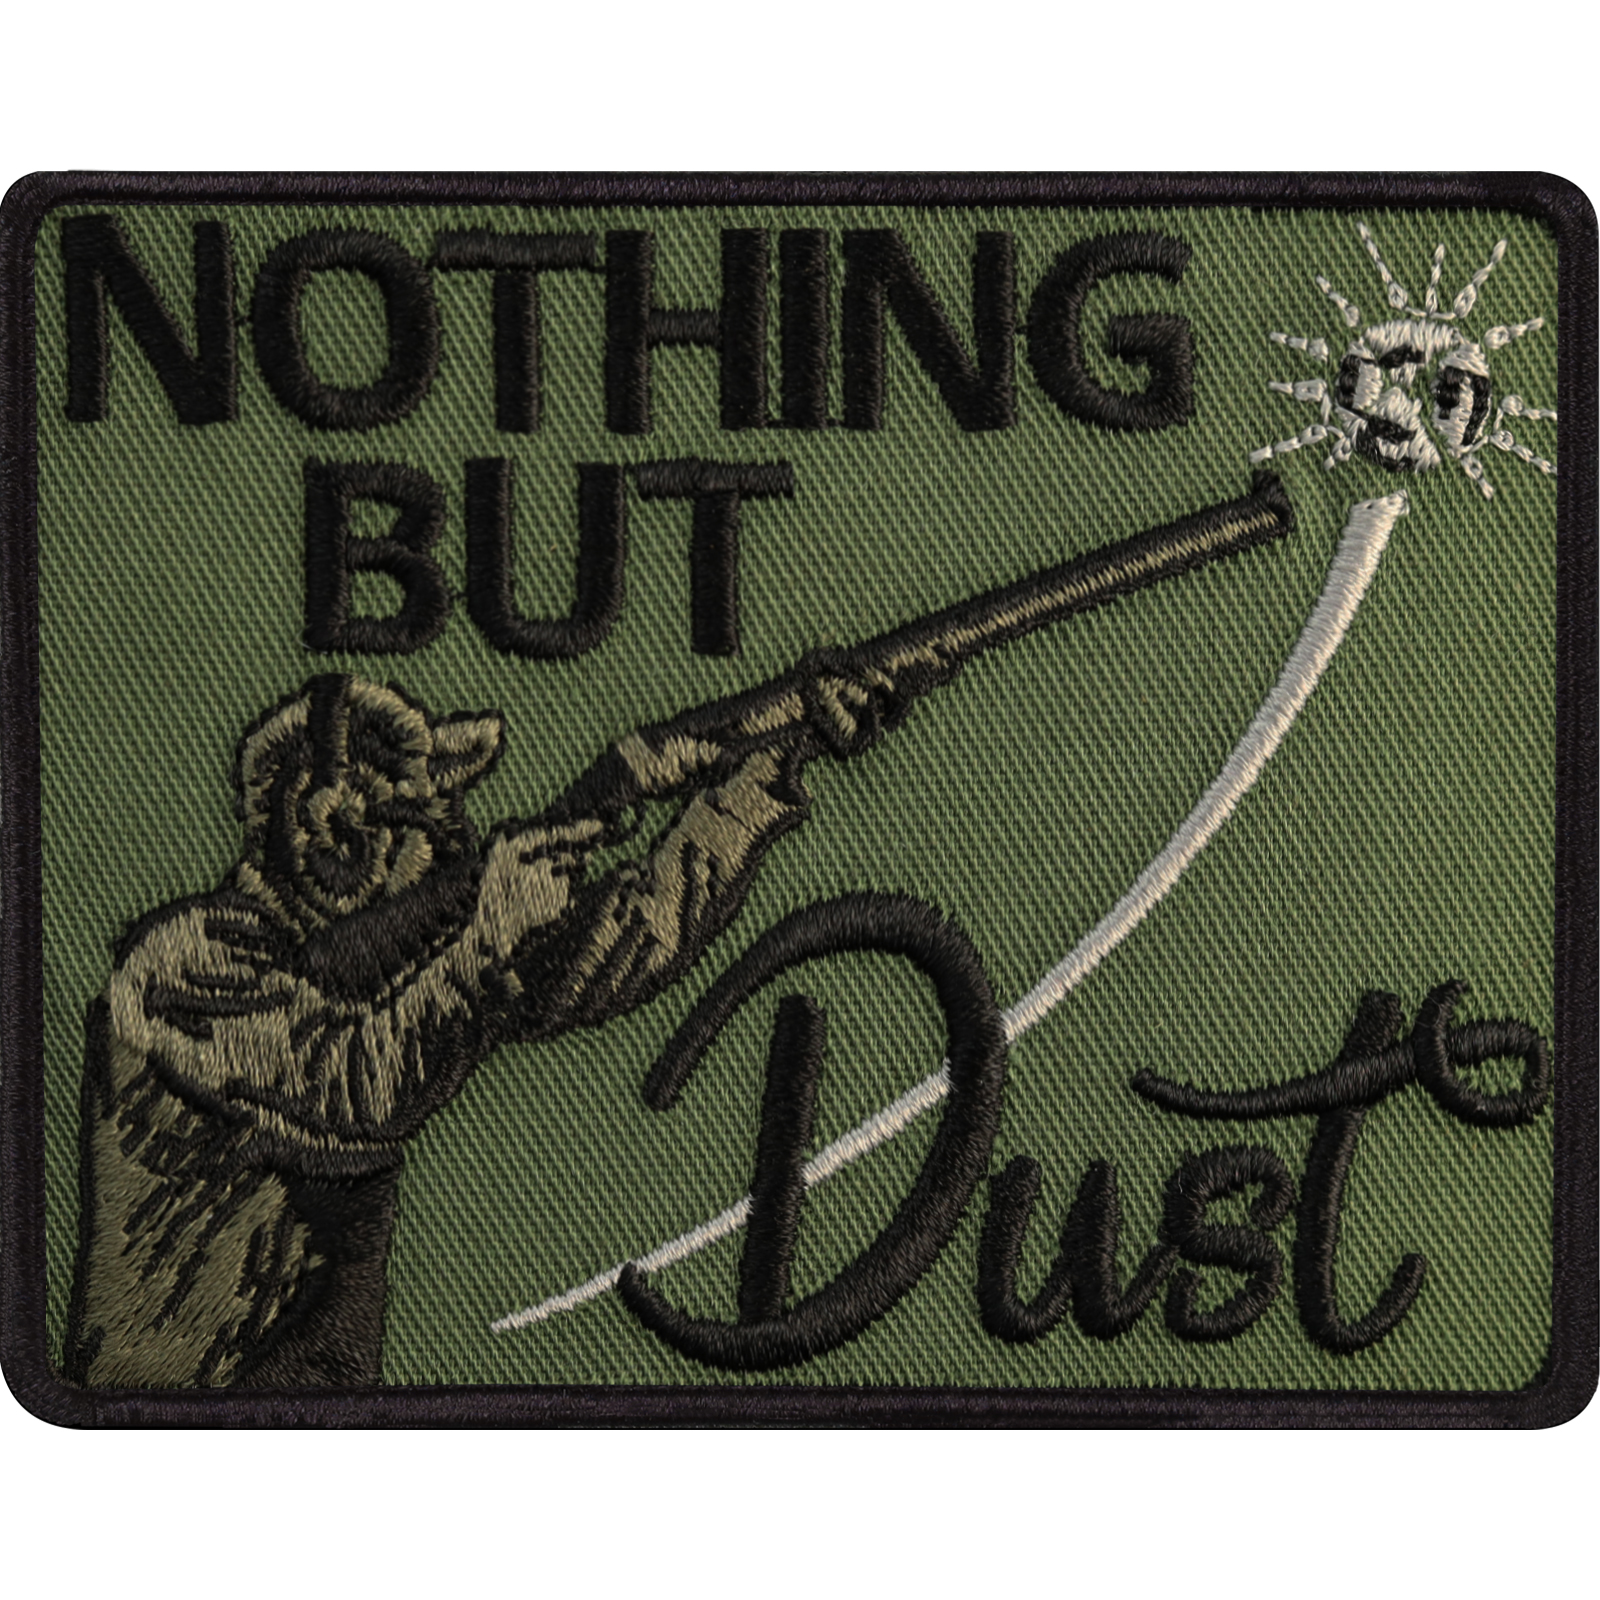 Nothing but dust - Patch